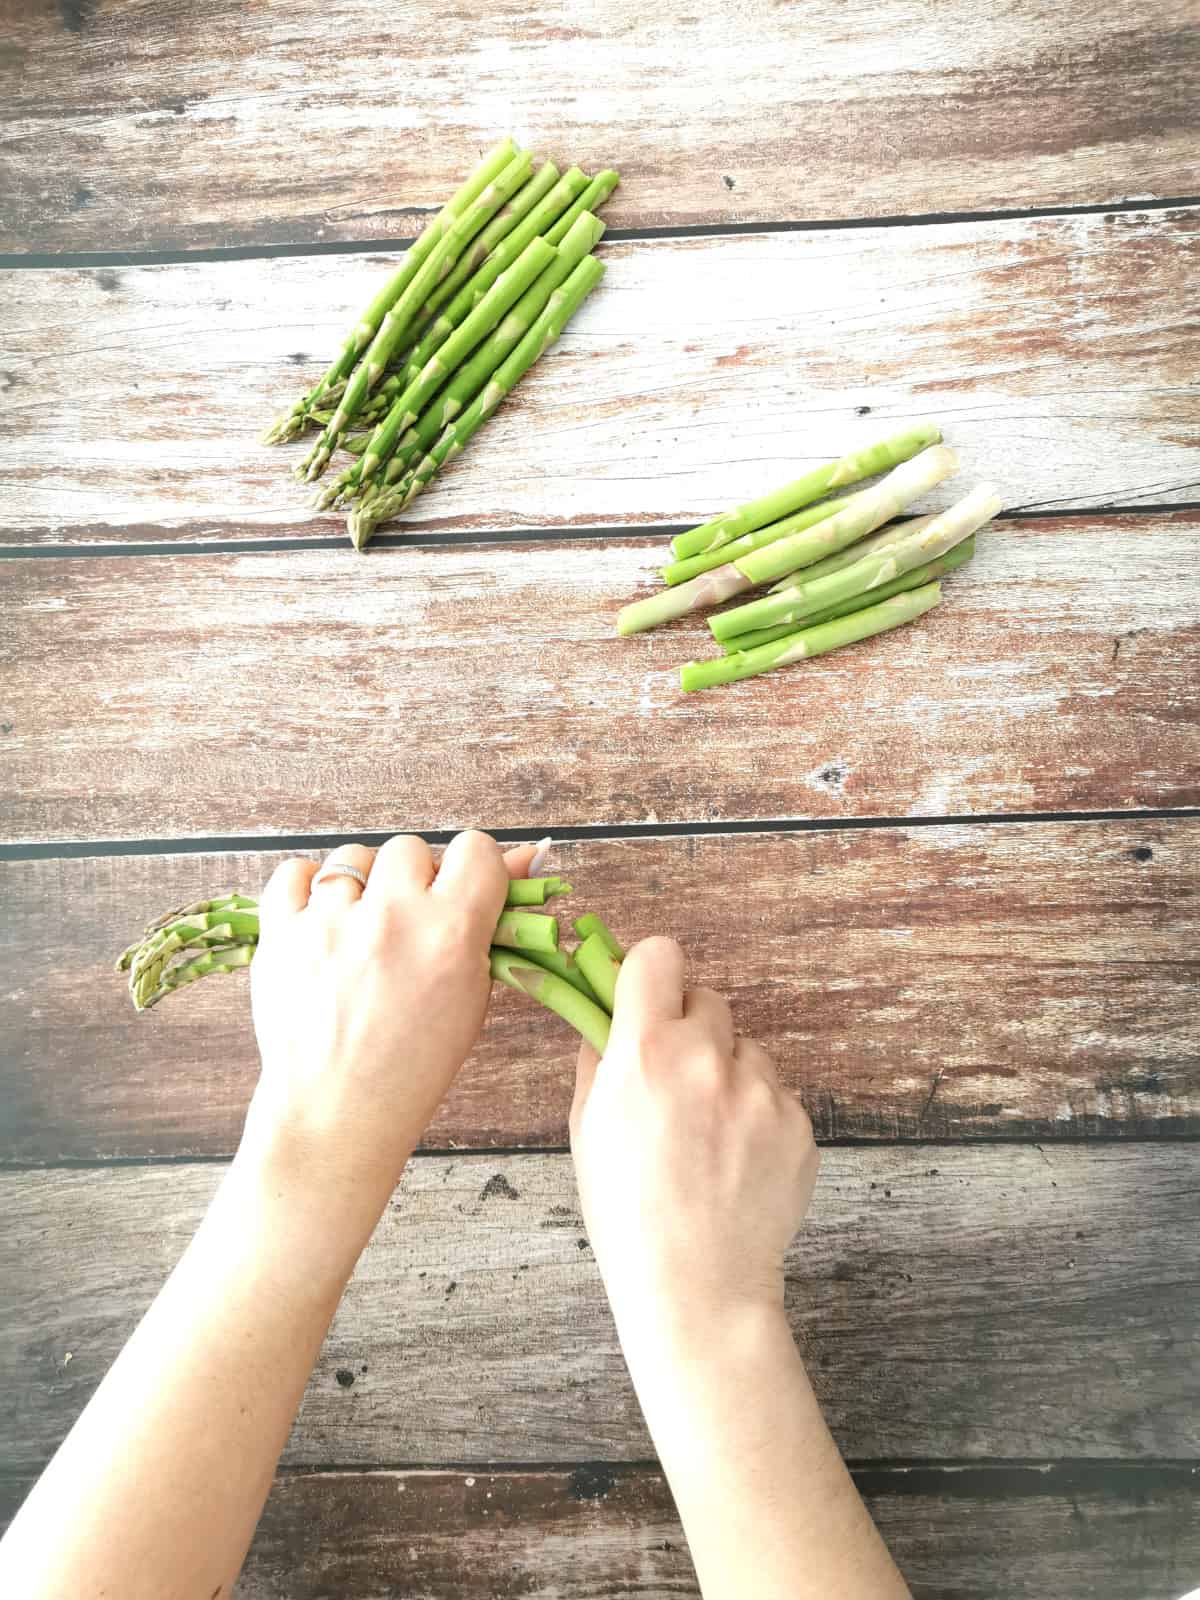 two hands snapping off the ends of asparagus spears.